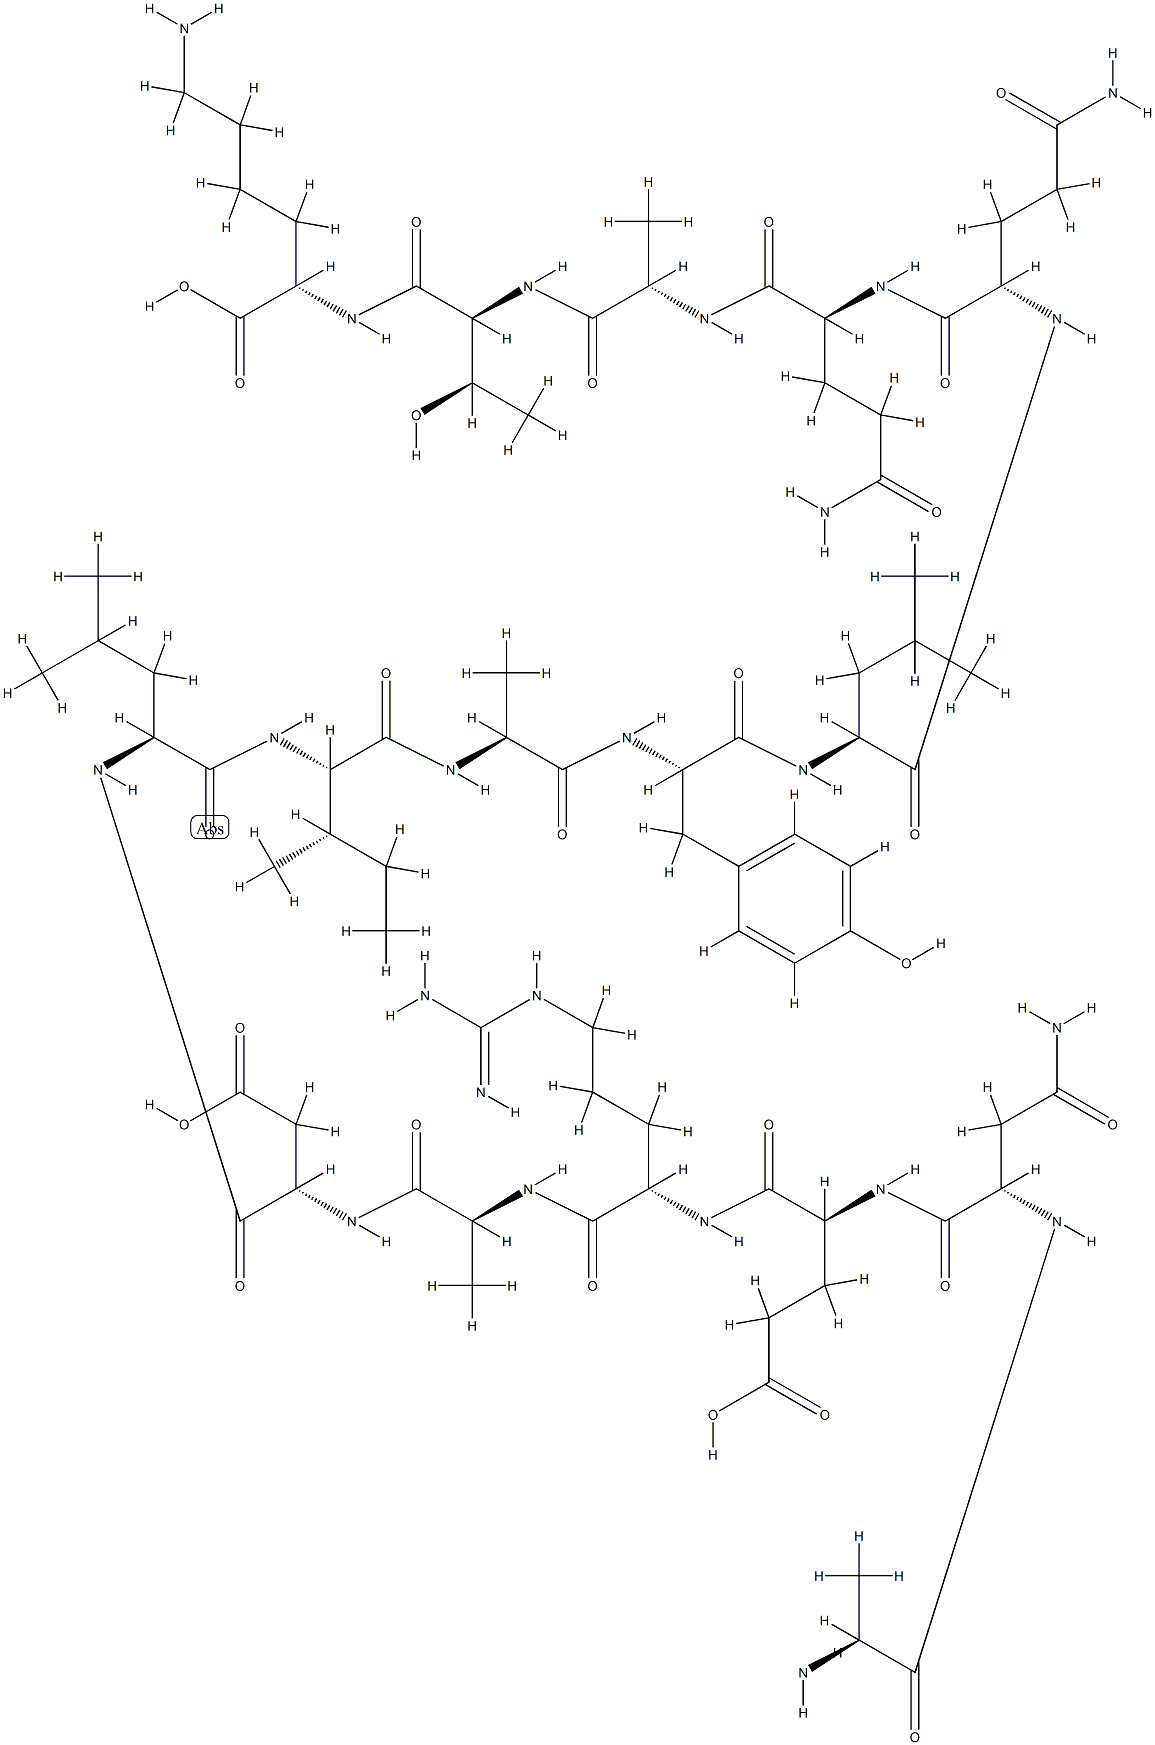 Moth Cytochrome C (MCC) Fragment Structure